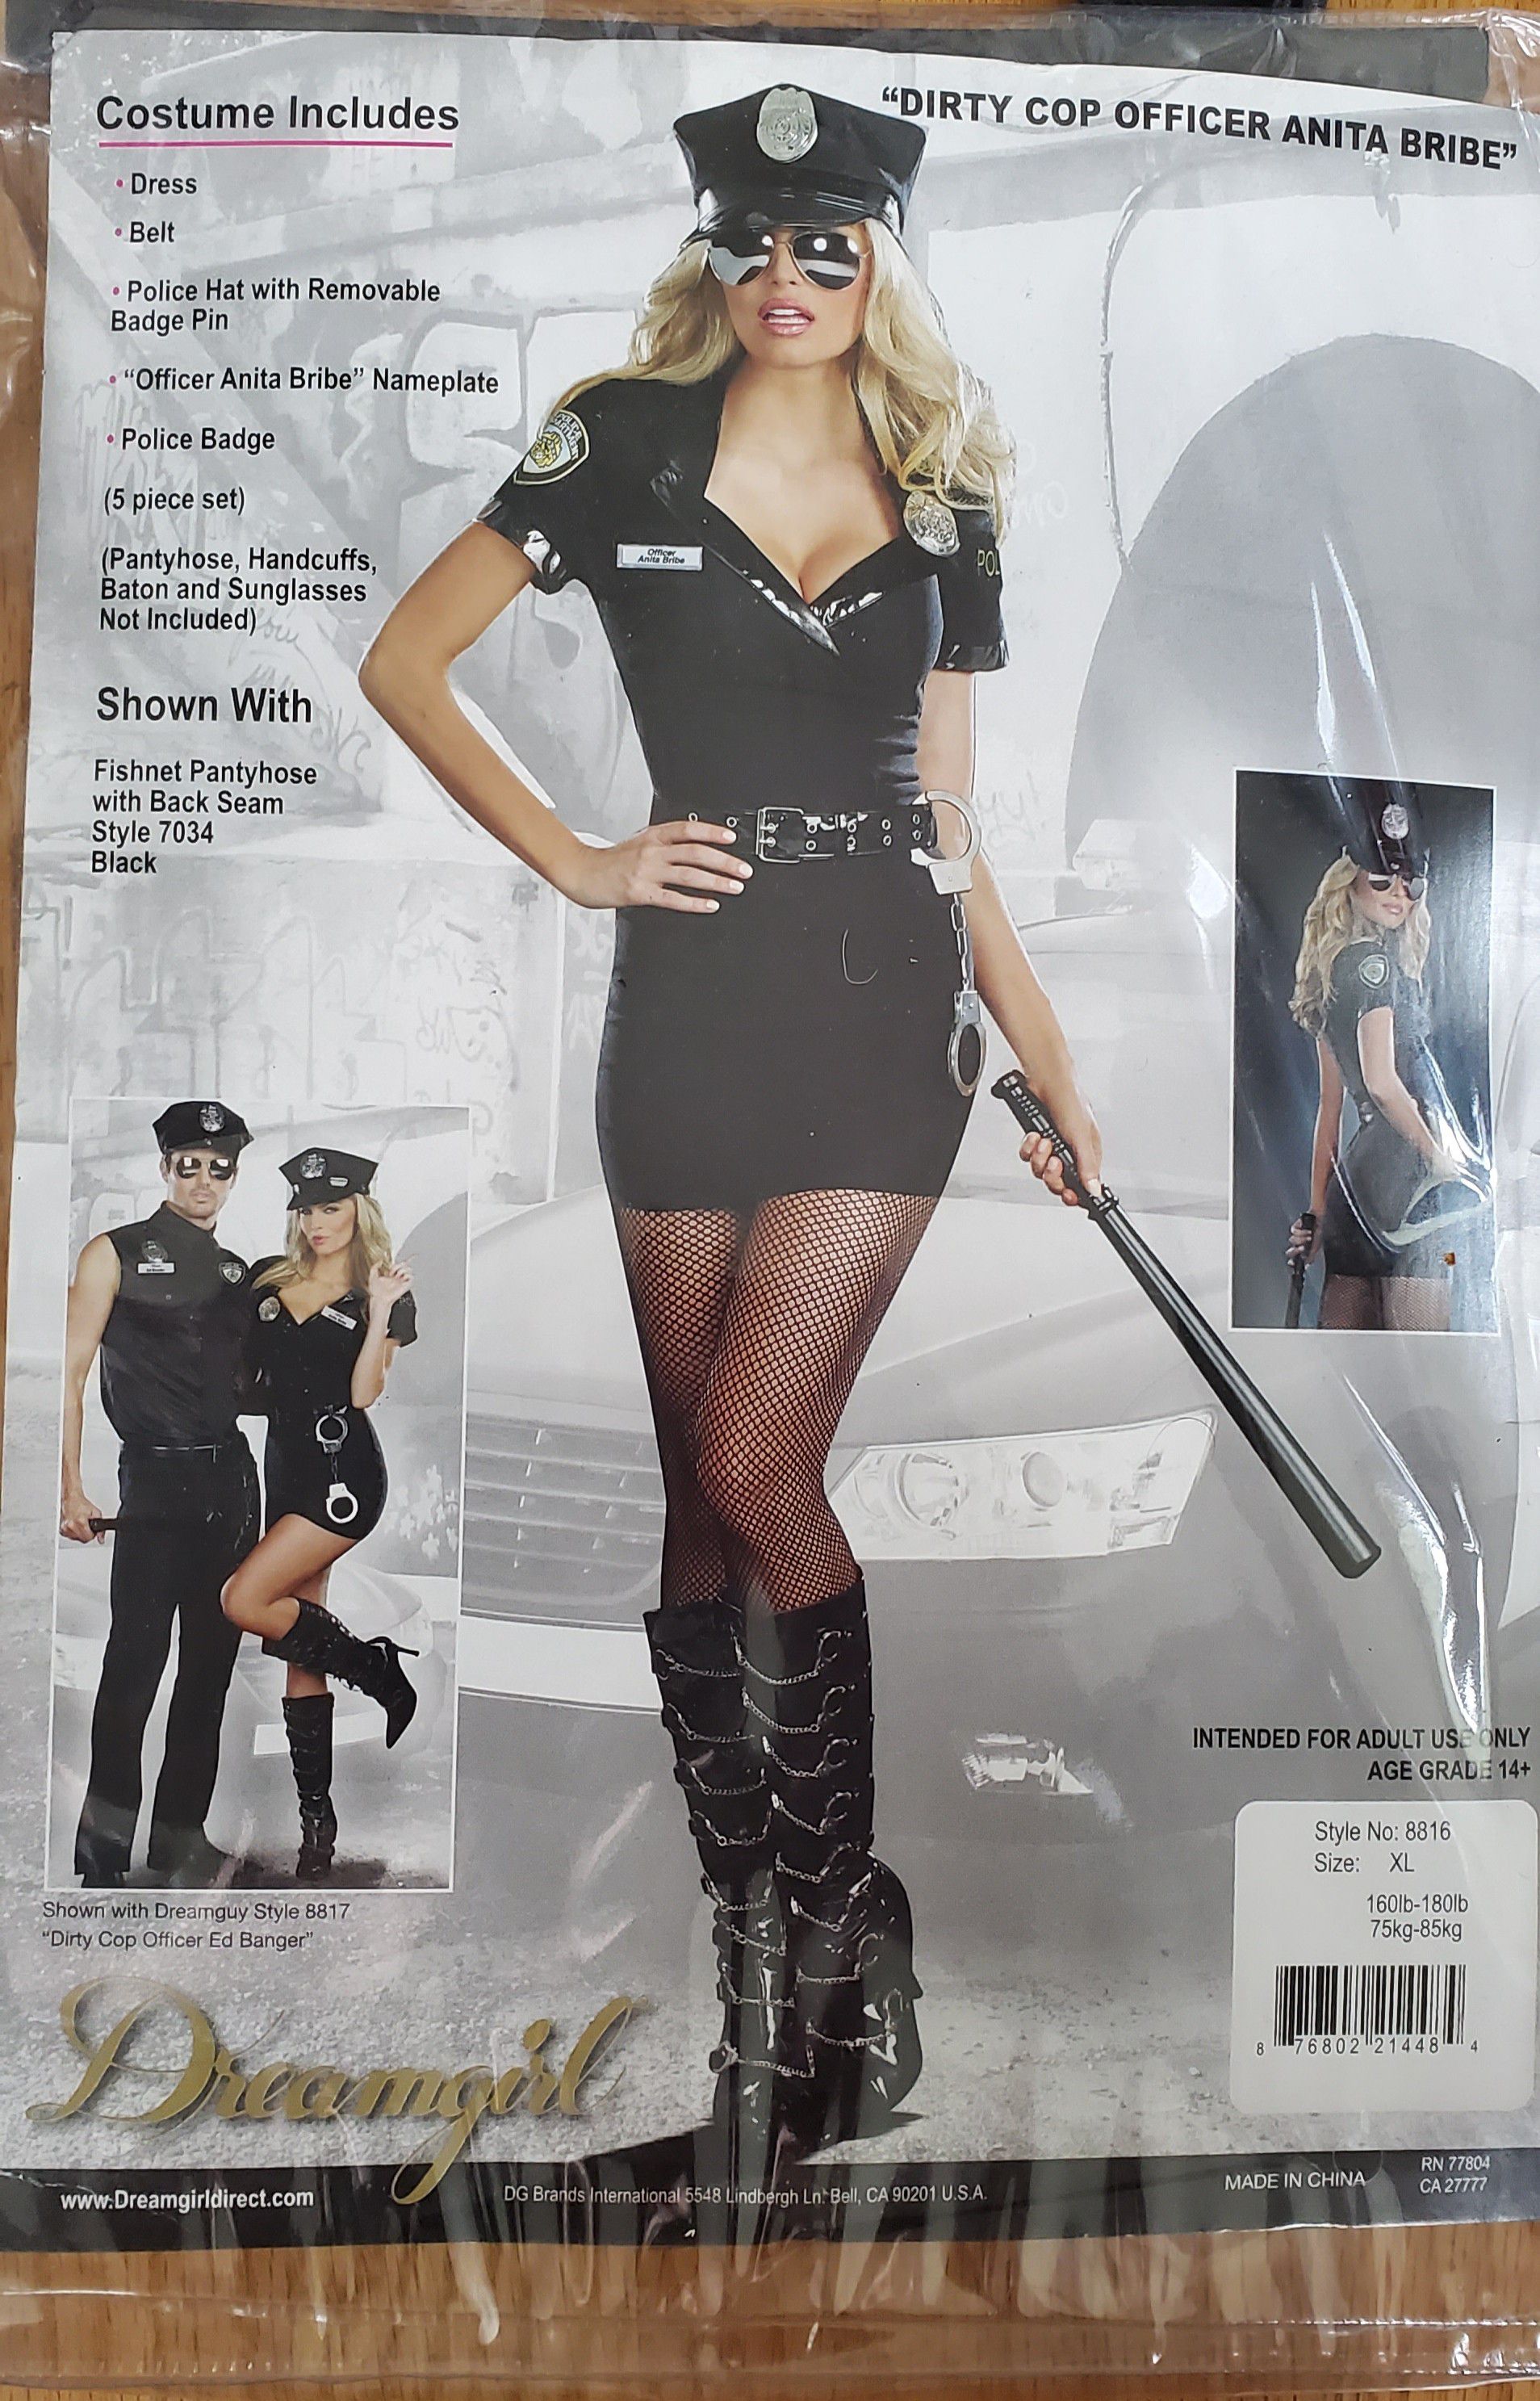 Dirty Cop Costume size XL